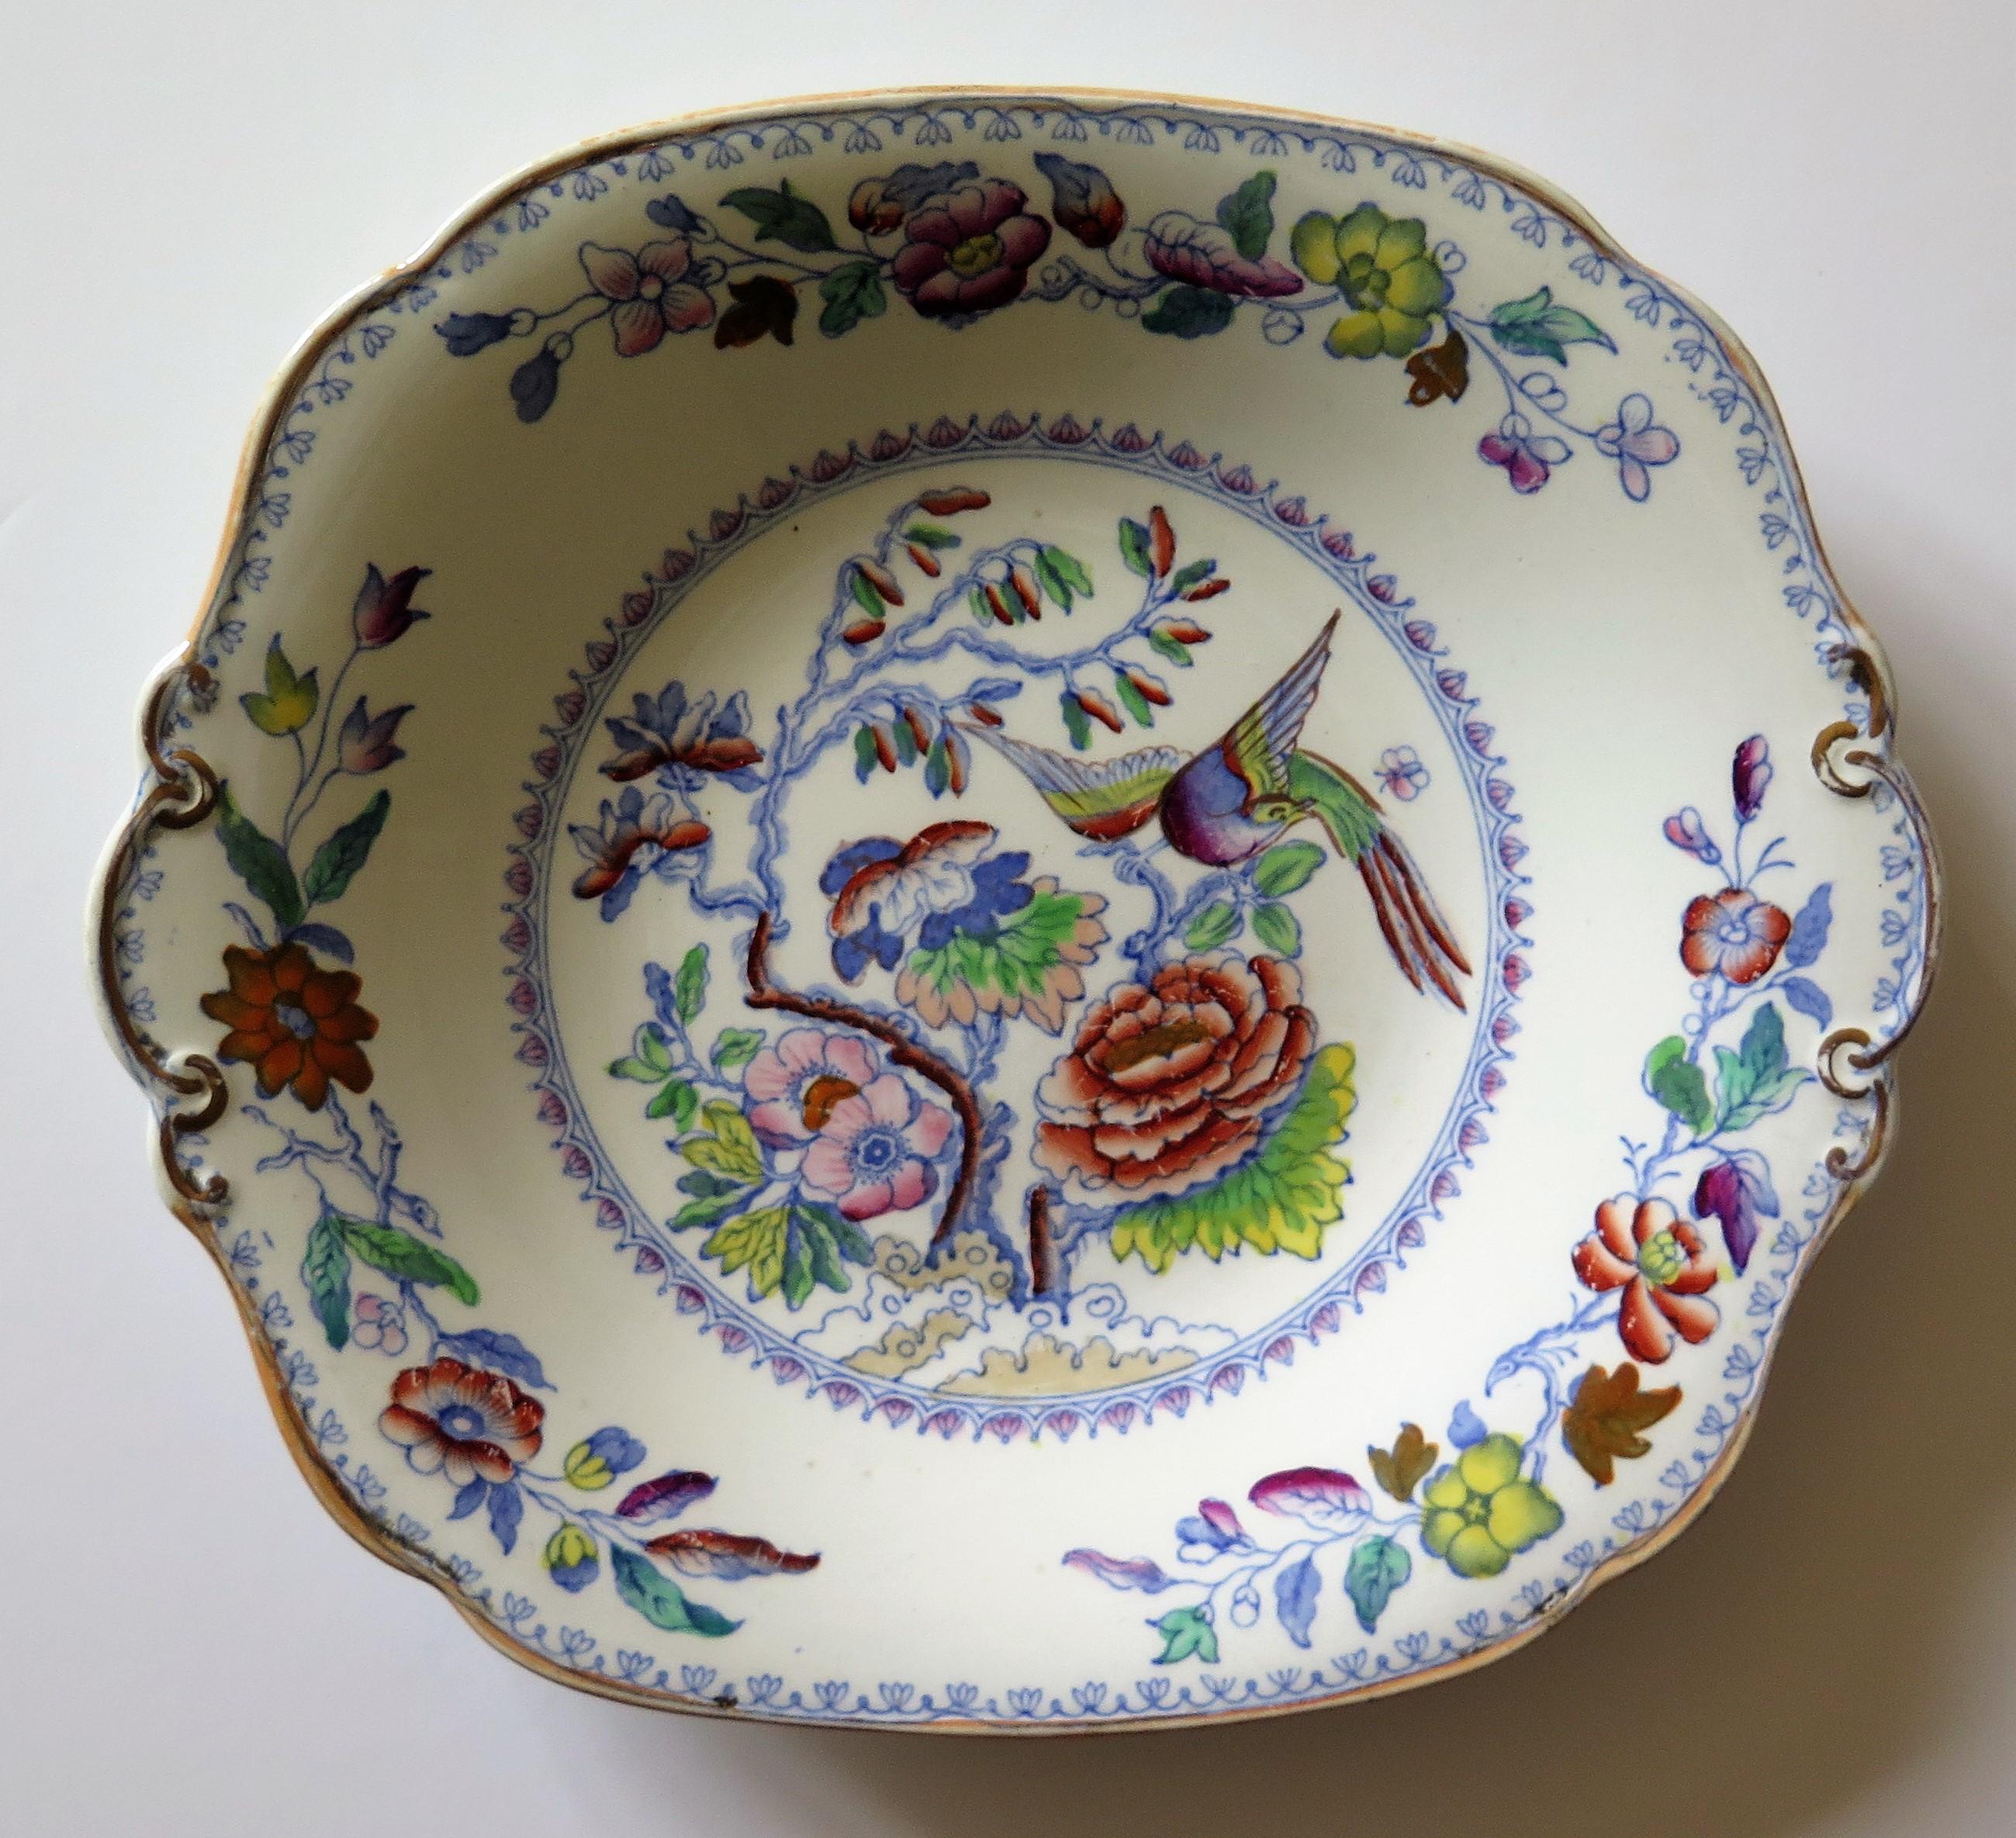 This is an ironstone desert dish or plate in the flying bird pattern, made by Mason's Ironstone of Lane Delph, Staffordshire, England, during the 19th century, circa 1880.

The dish or plate is rectangular in shape with a wavy rim having two